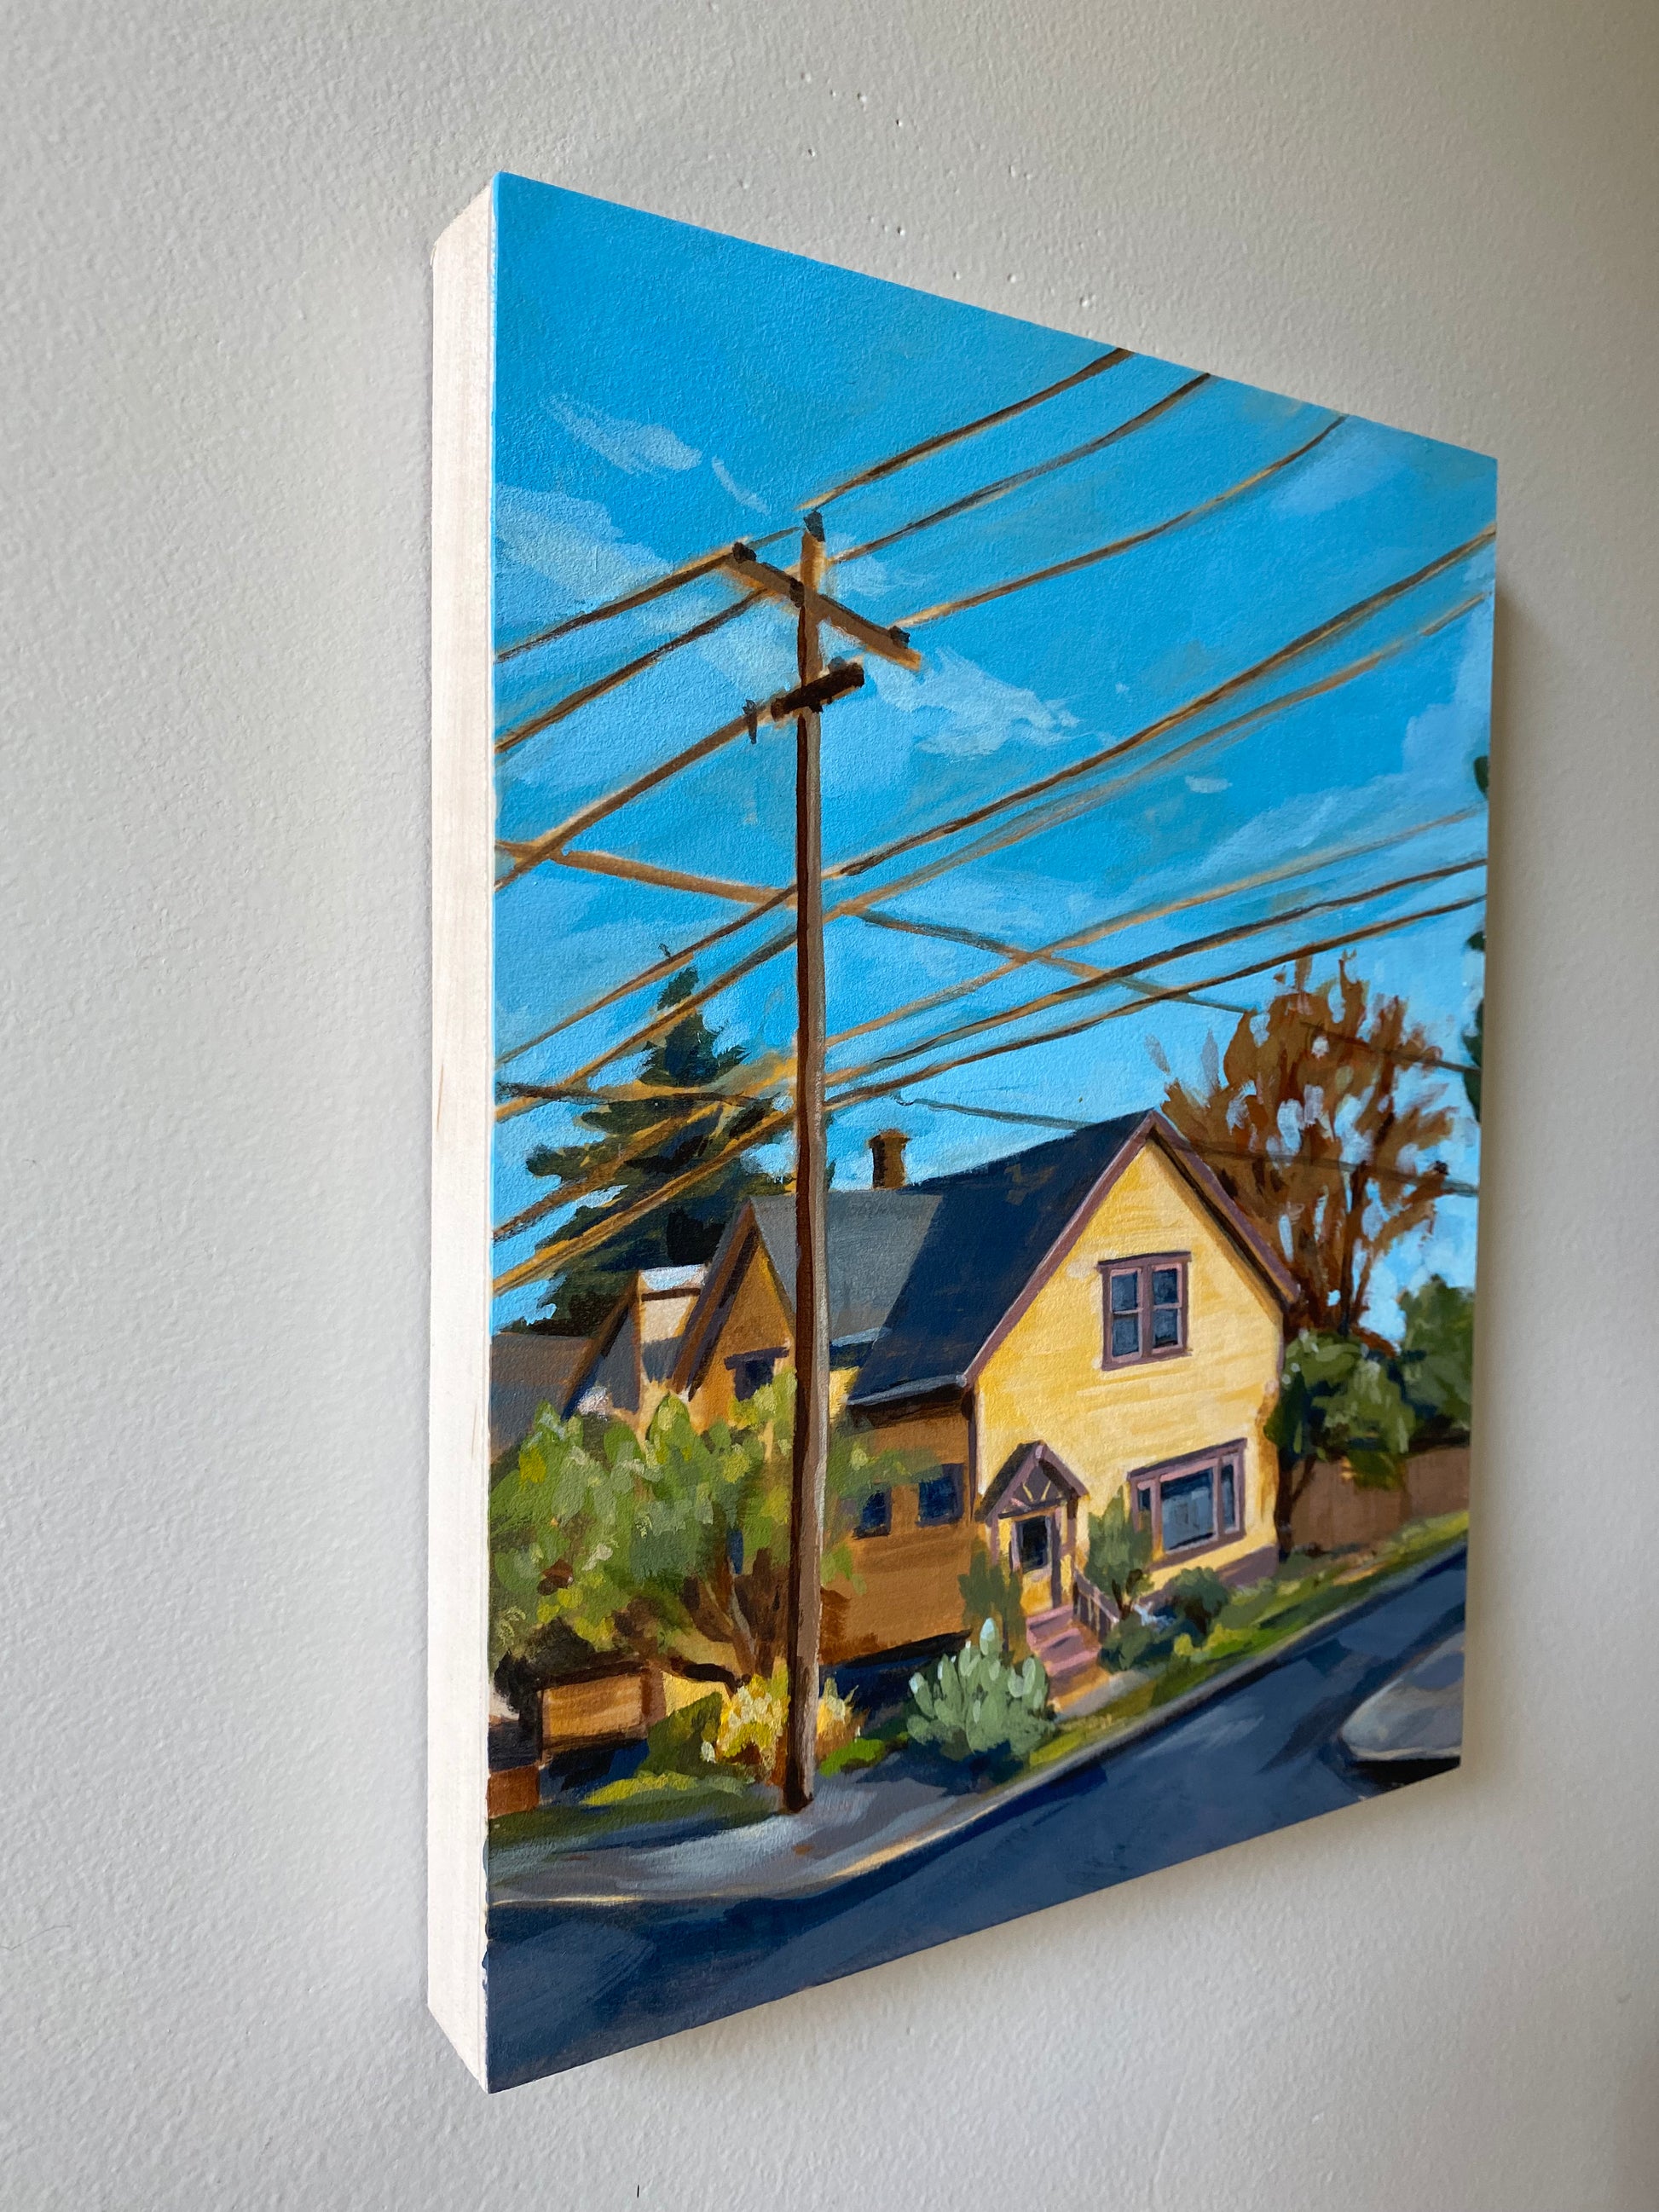 Unframed 8x10 painting of a yellow house in a Portland neighborhood. View from left angle.